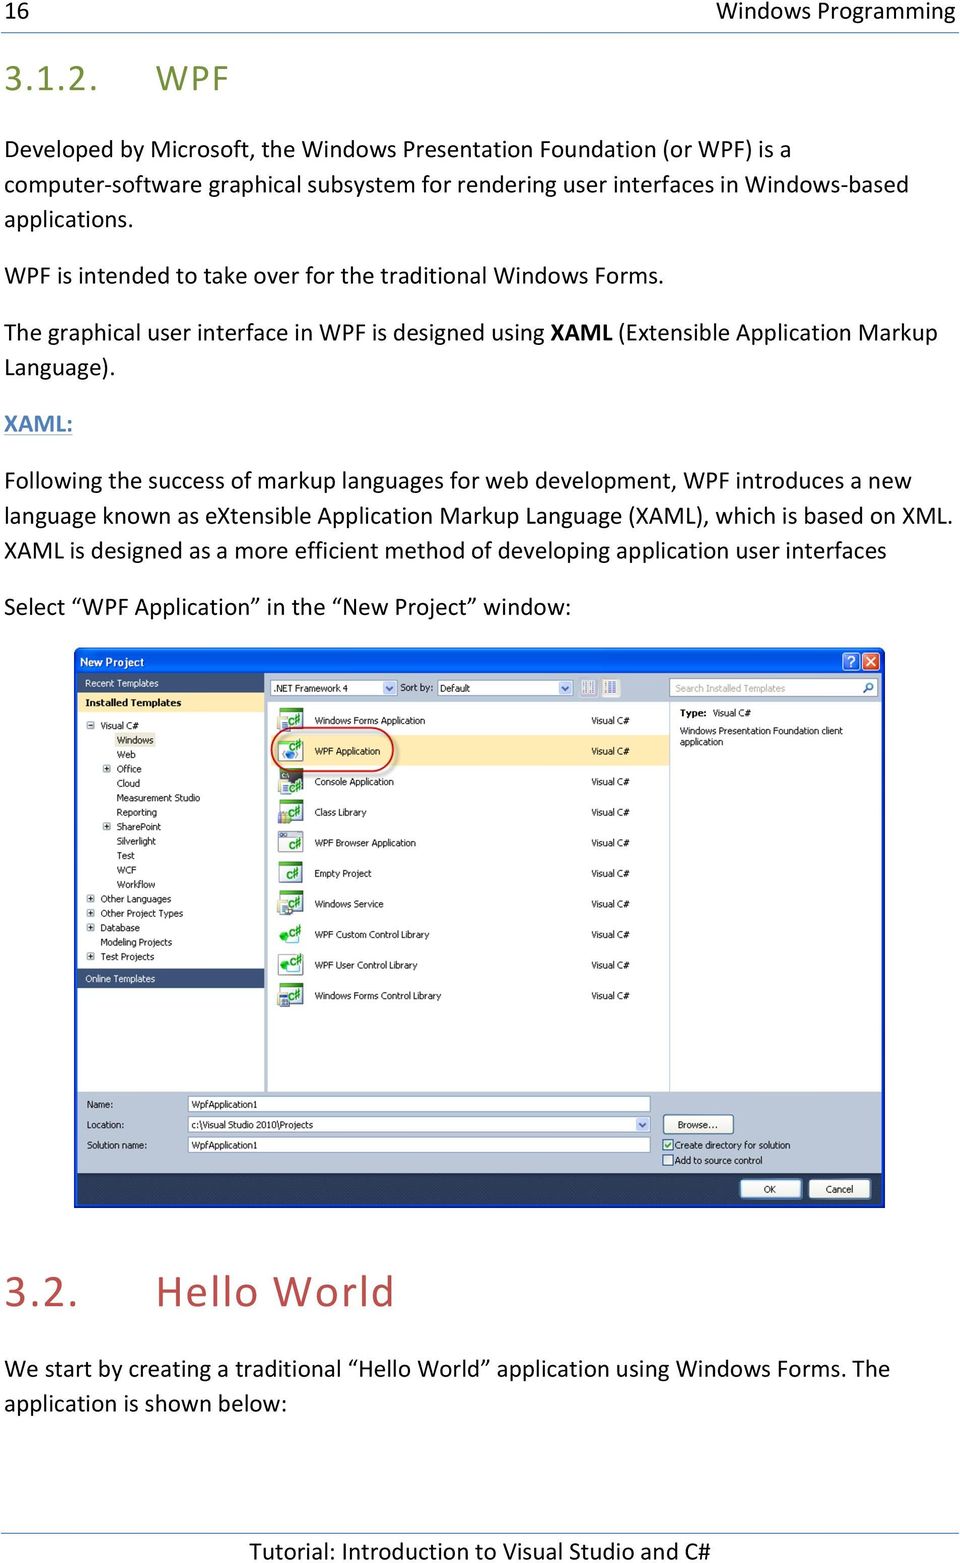 WPF is intended to take over for the traditional Windows Forms. The graphical user interface in WPF is designed using XAML (Extensible Application Markup Language).